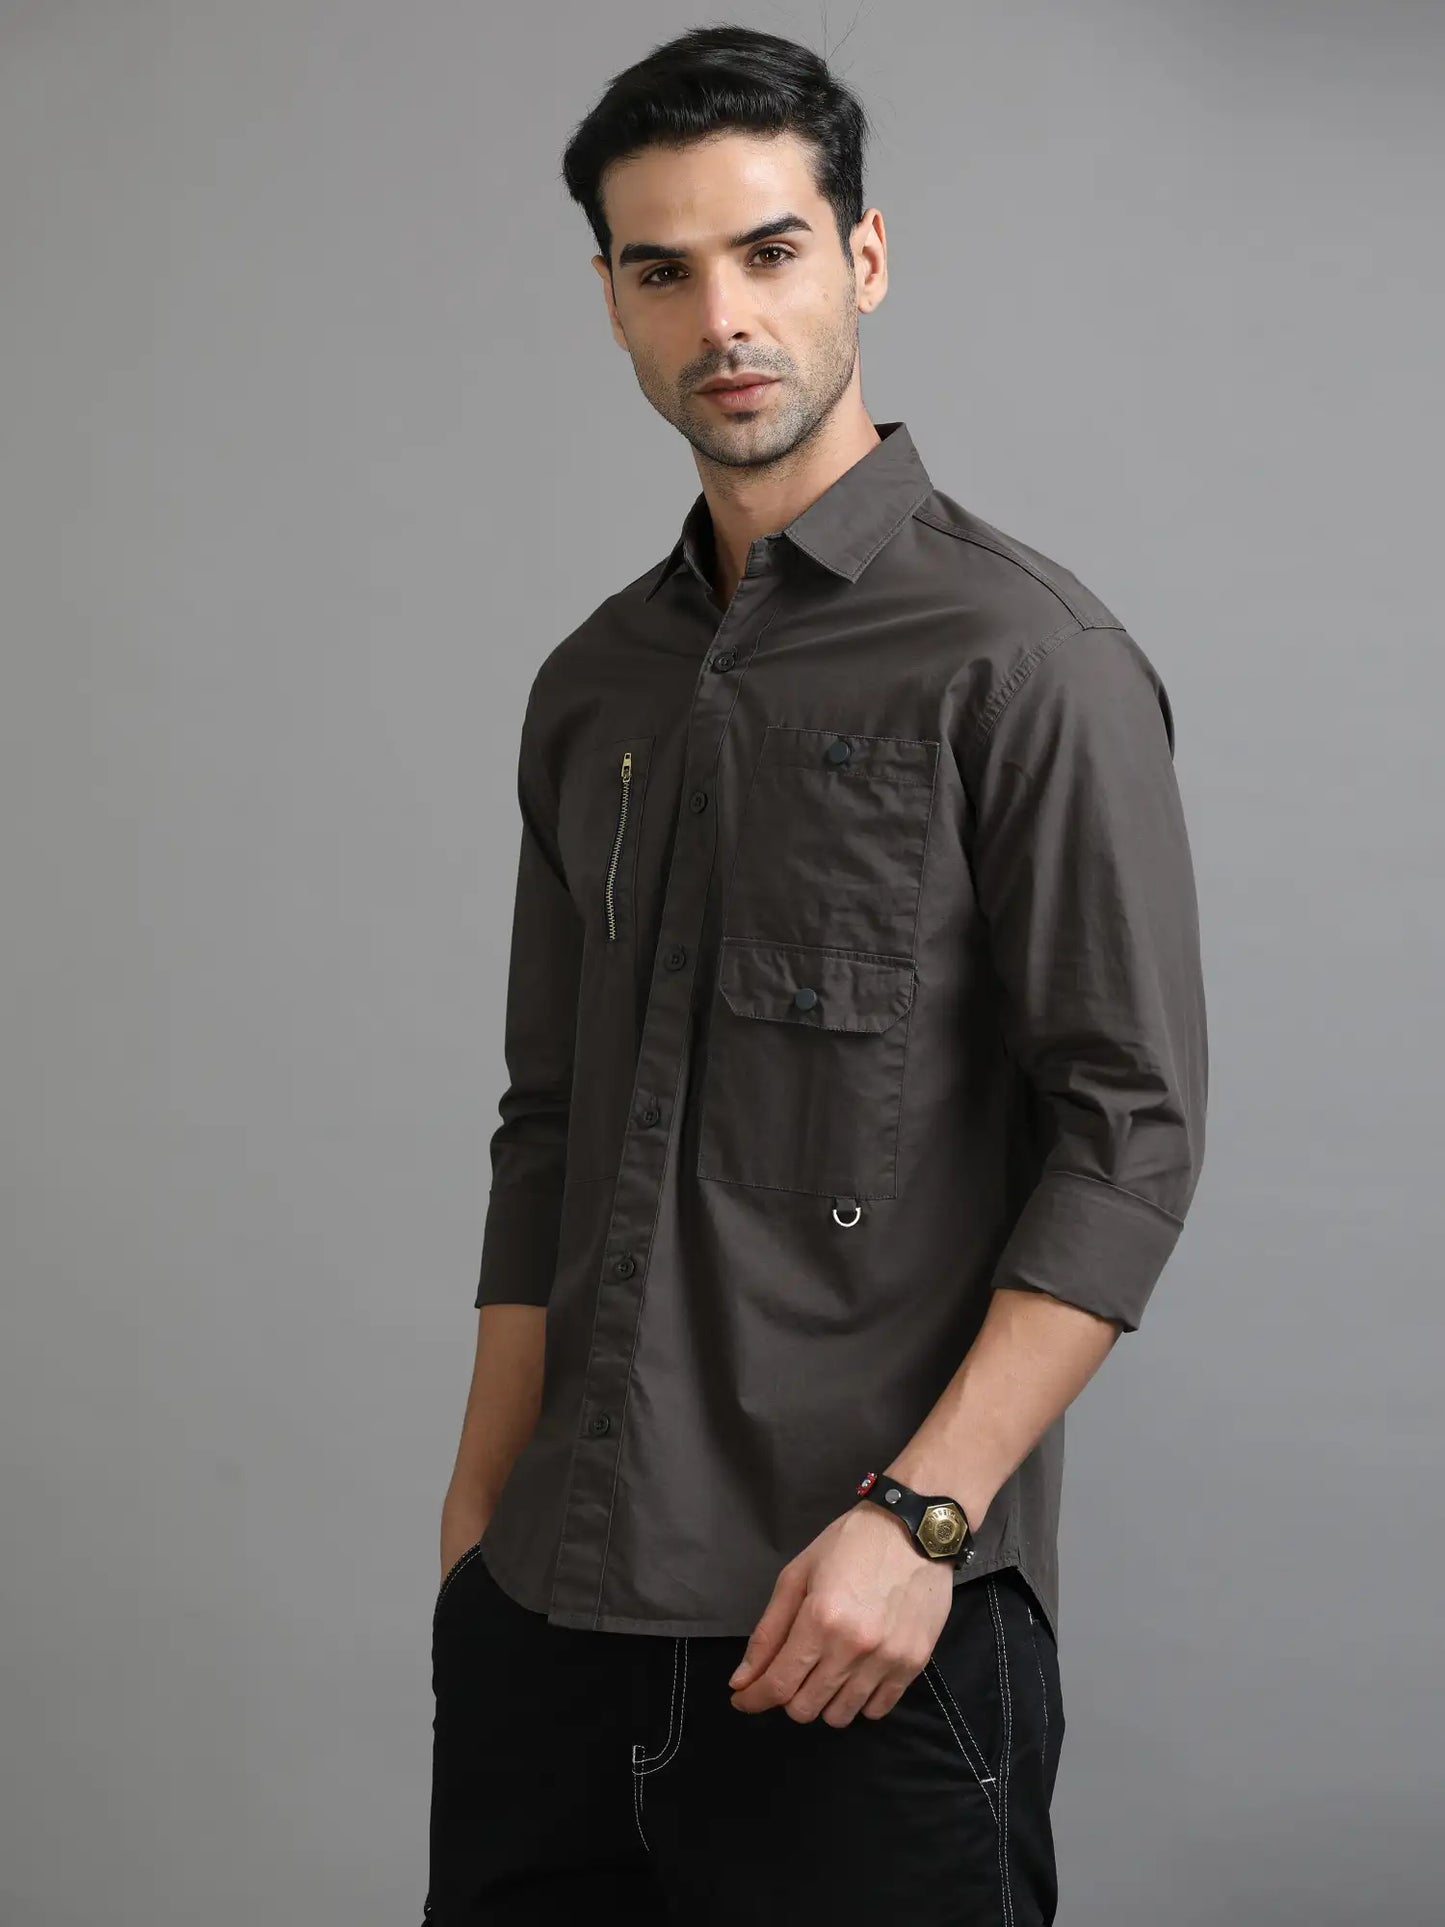 Solid and Concrete Grey Shirt for Men 